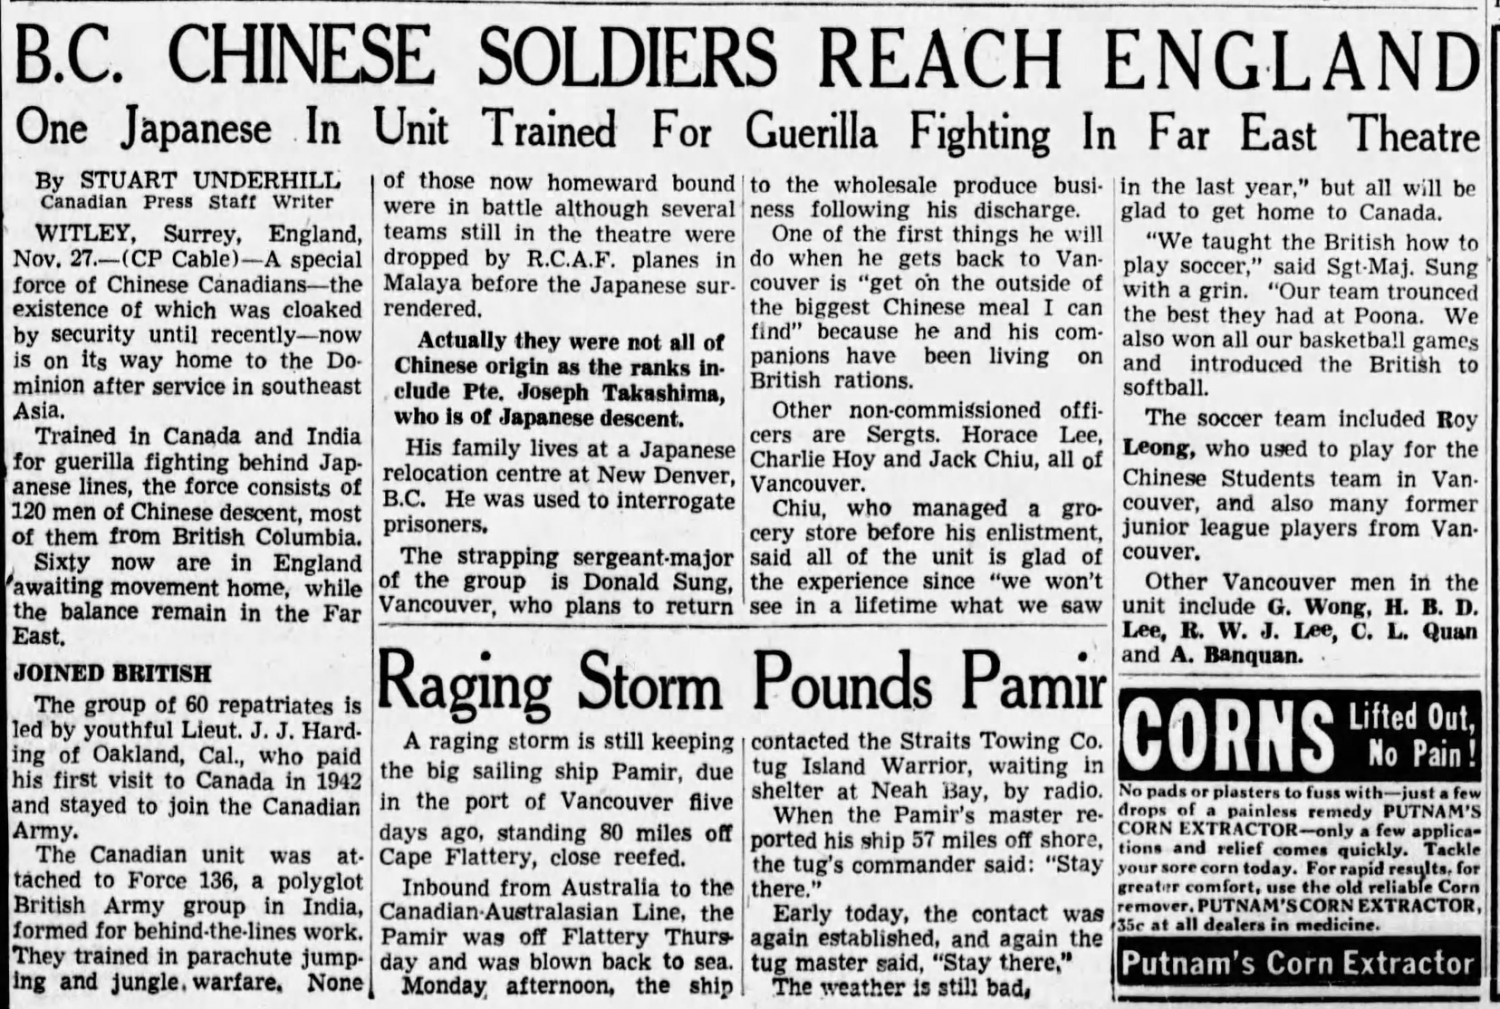 A 1945 article from The Province about Force 136 and a Japanese young man who fought for Canada while his family was interned overseas.